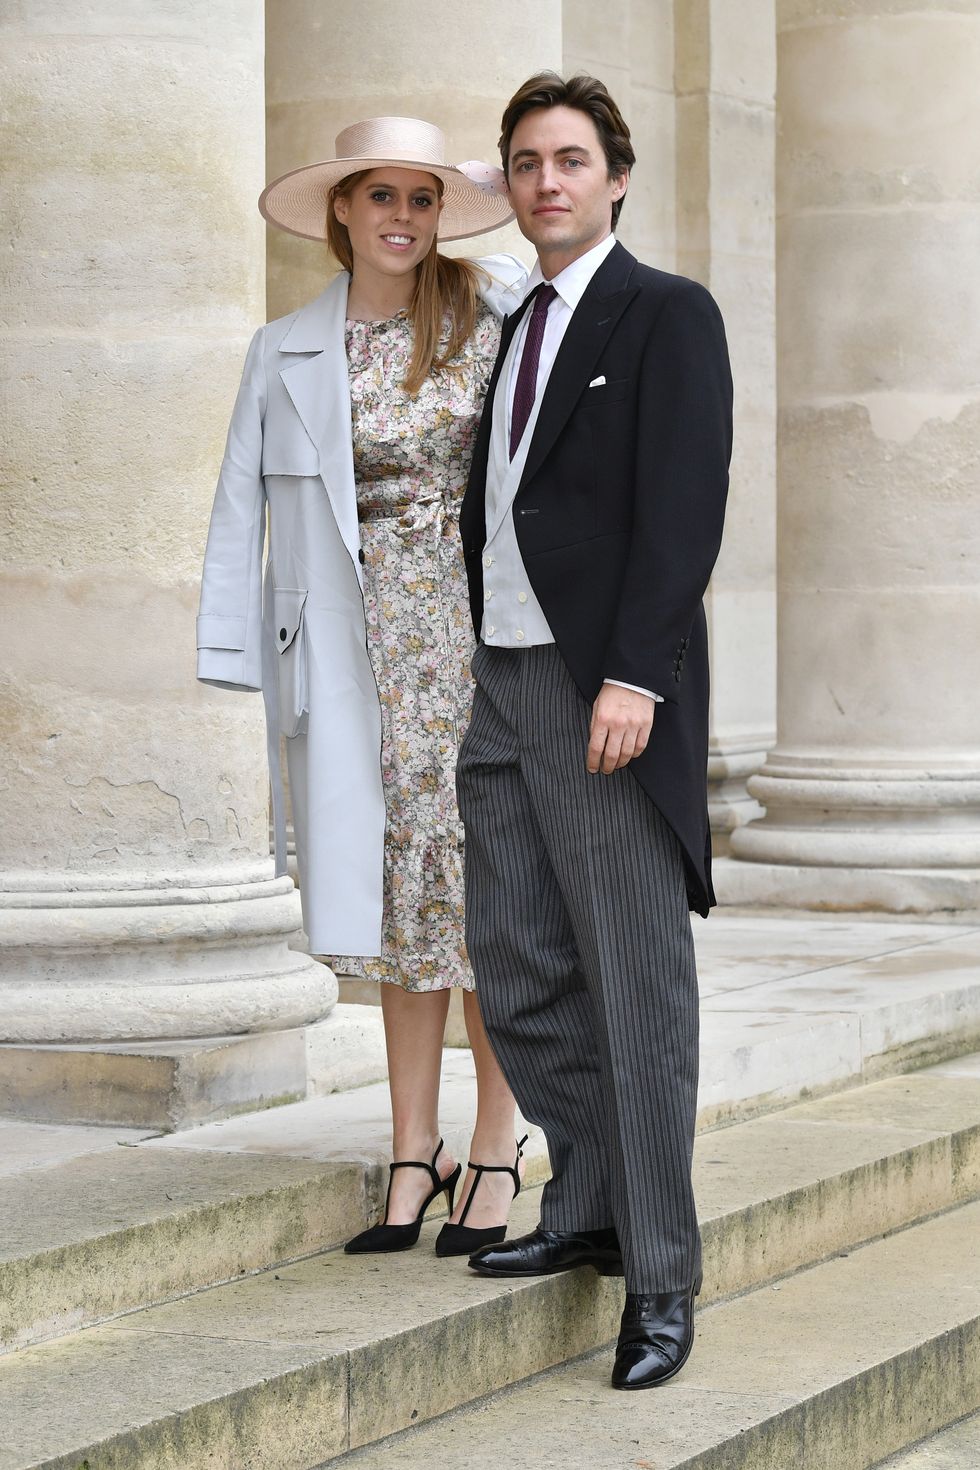 wedding of prince jean christophe napoleon and olympia von arco zinneberg at les invalides